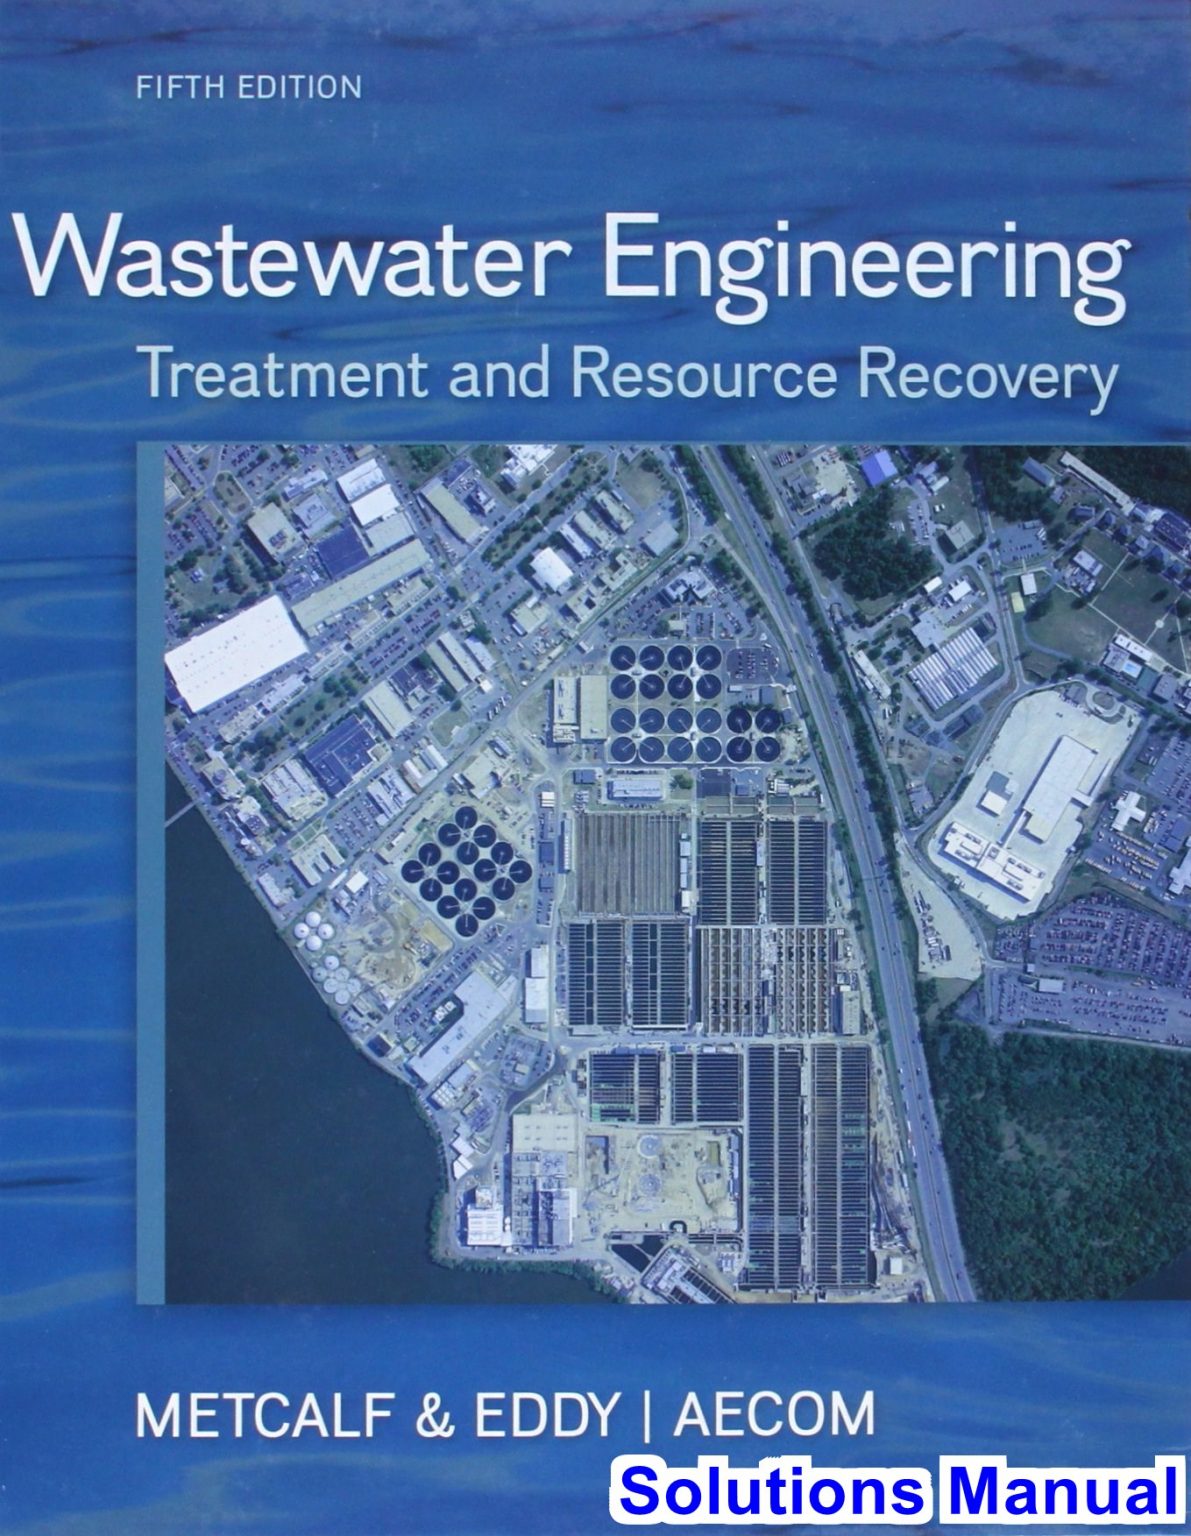 Wastewater Engineering Treatment and Reuse 5th Edition Metcalf